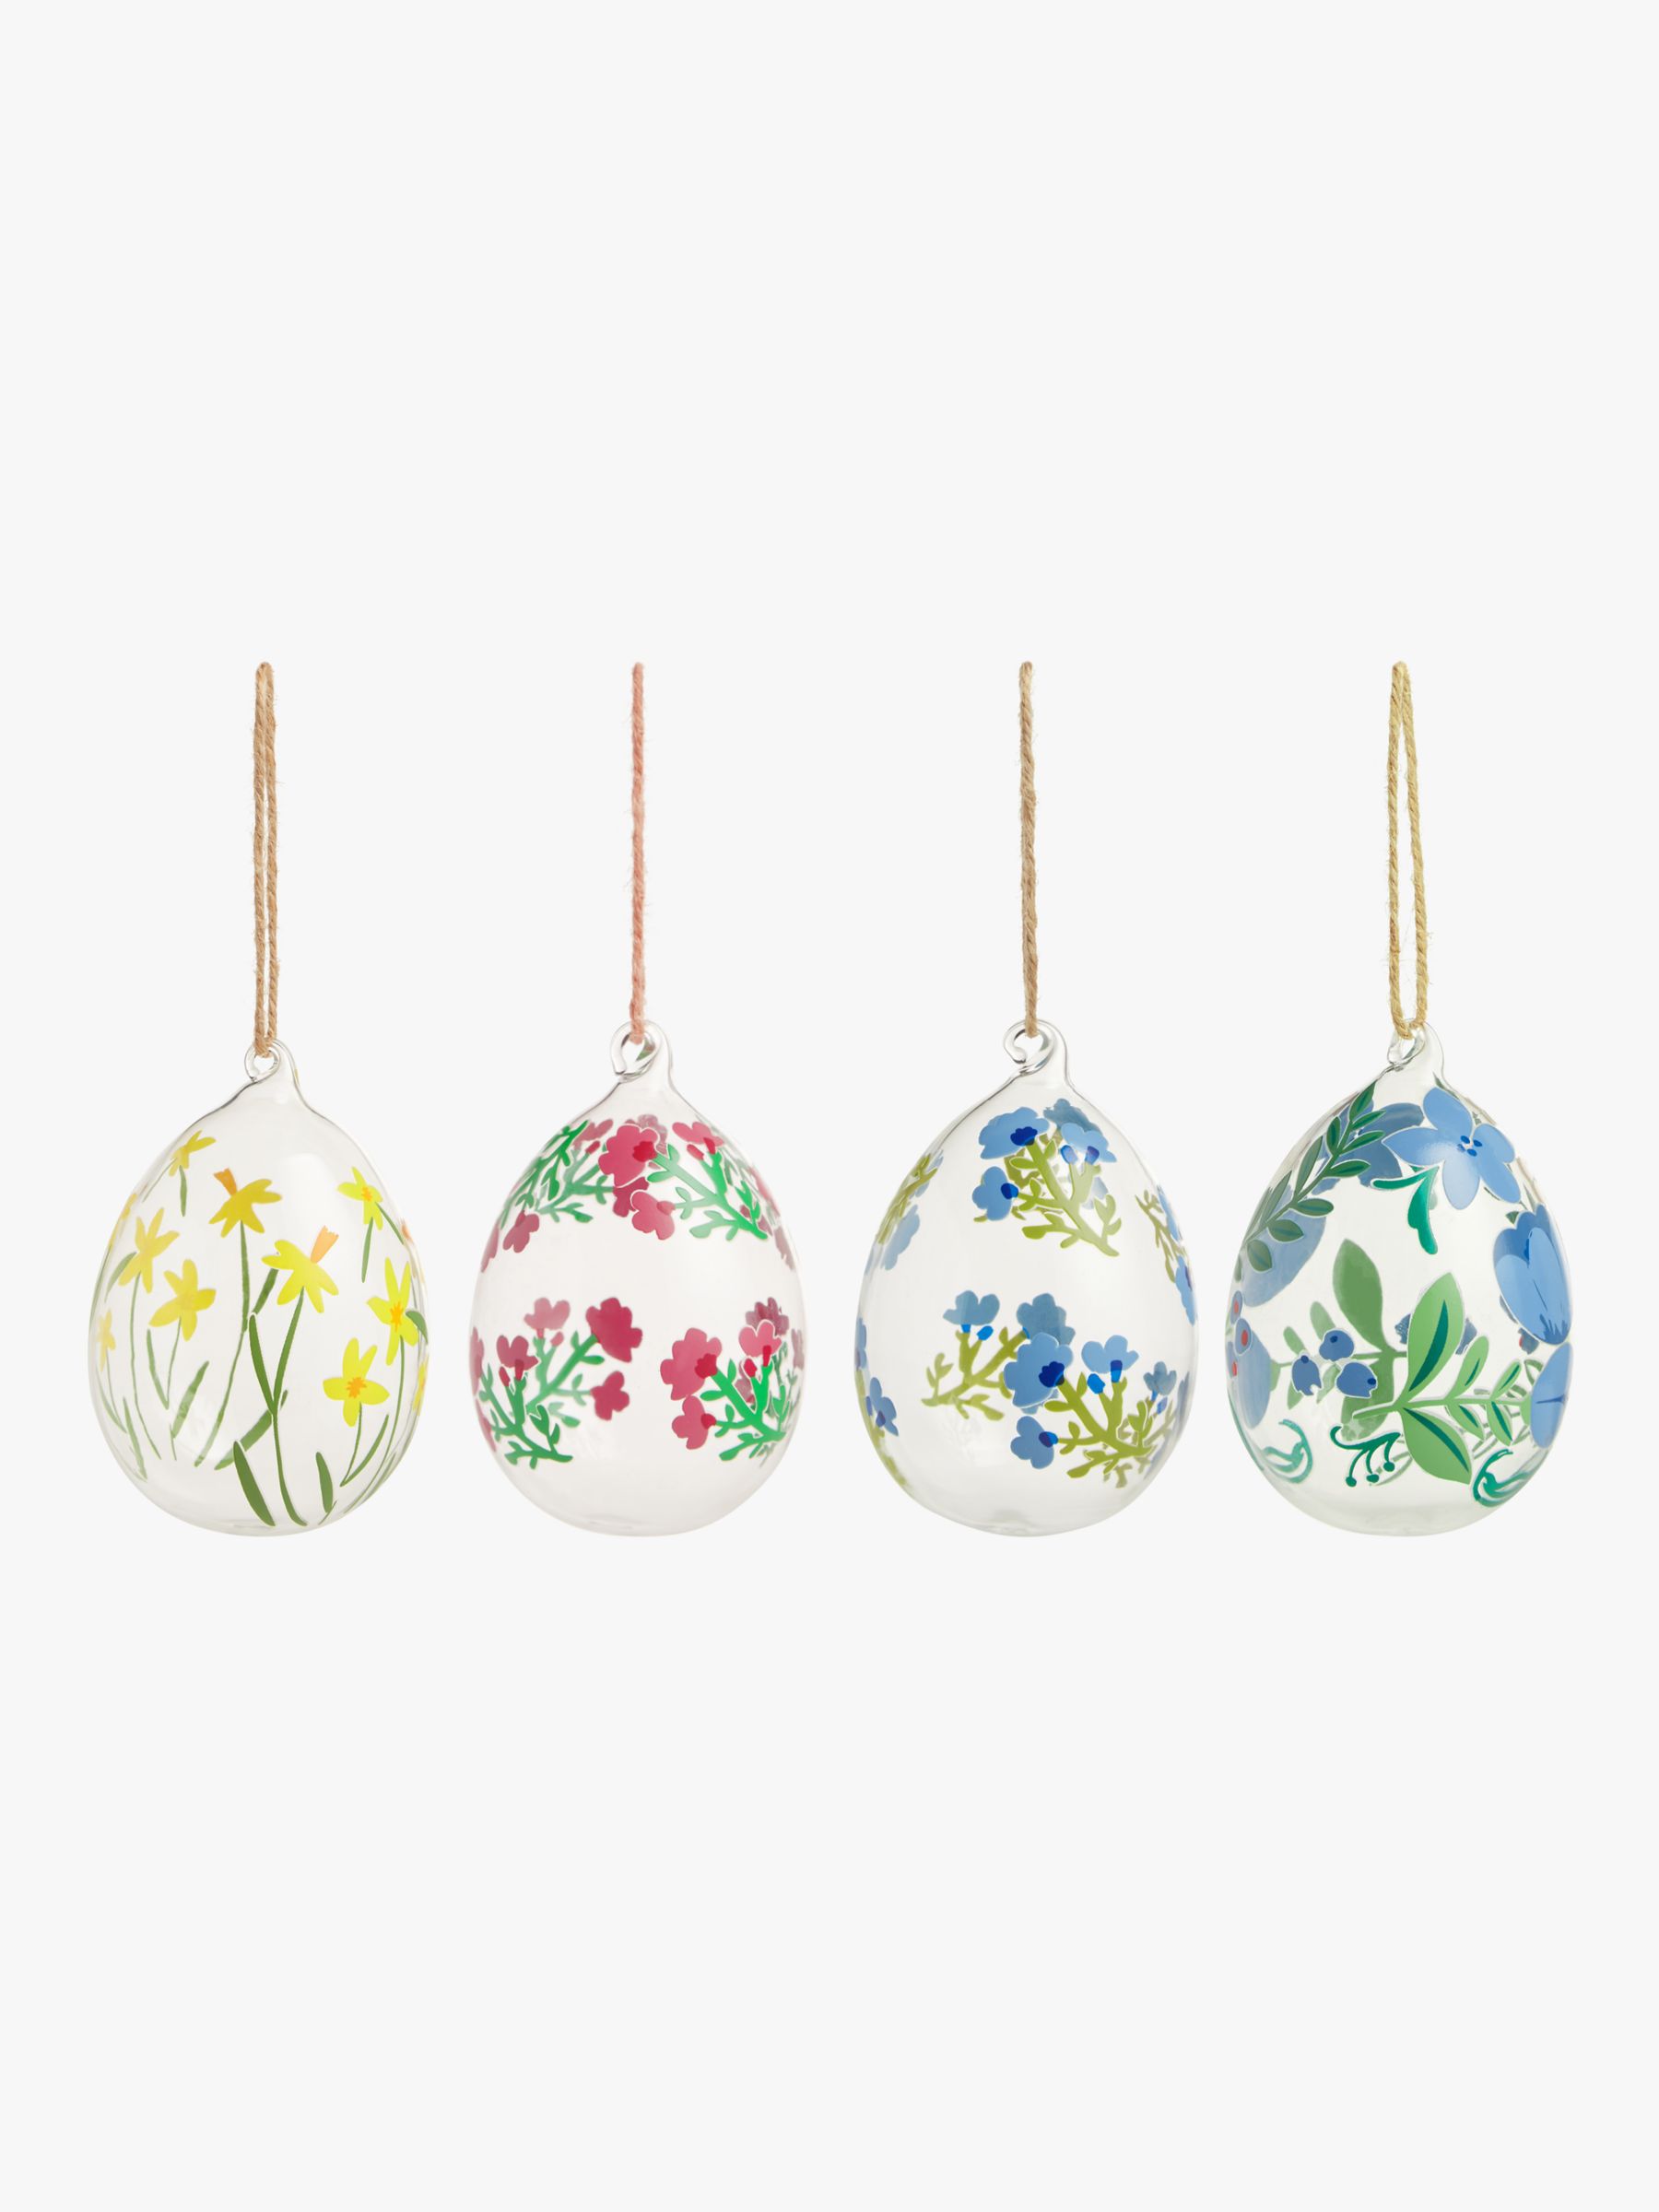 John Lewis Floral Glass Hand Painted Egg Hanging Decoration, Pack of 4